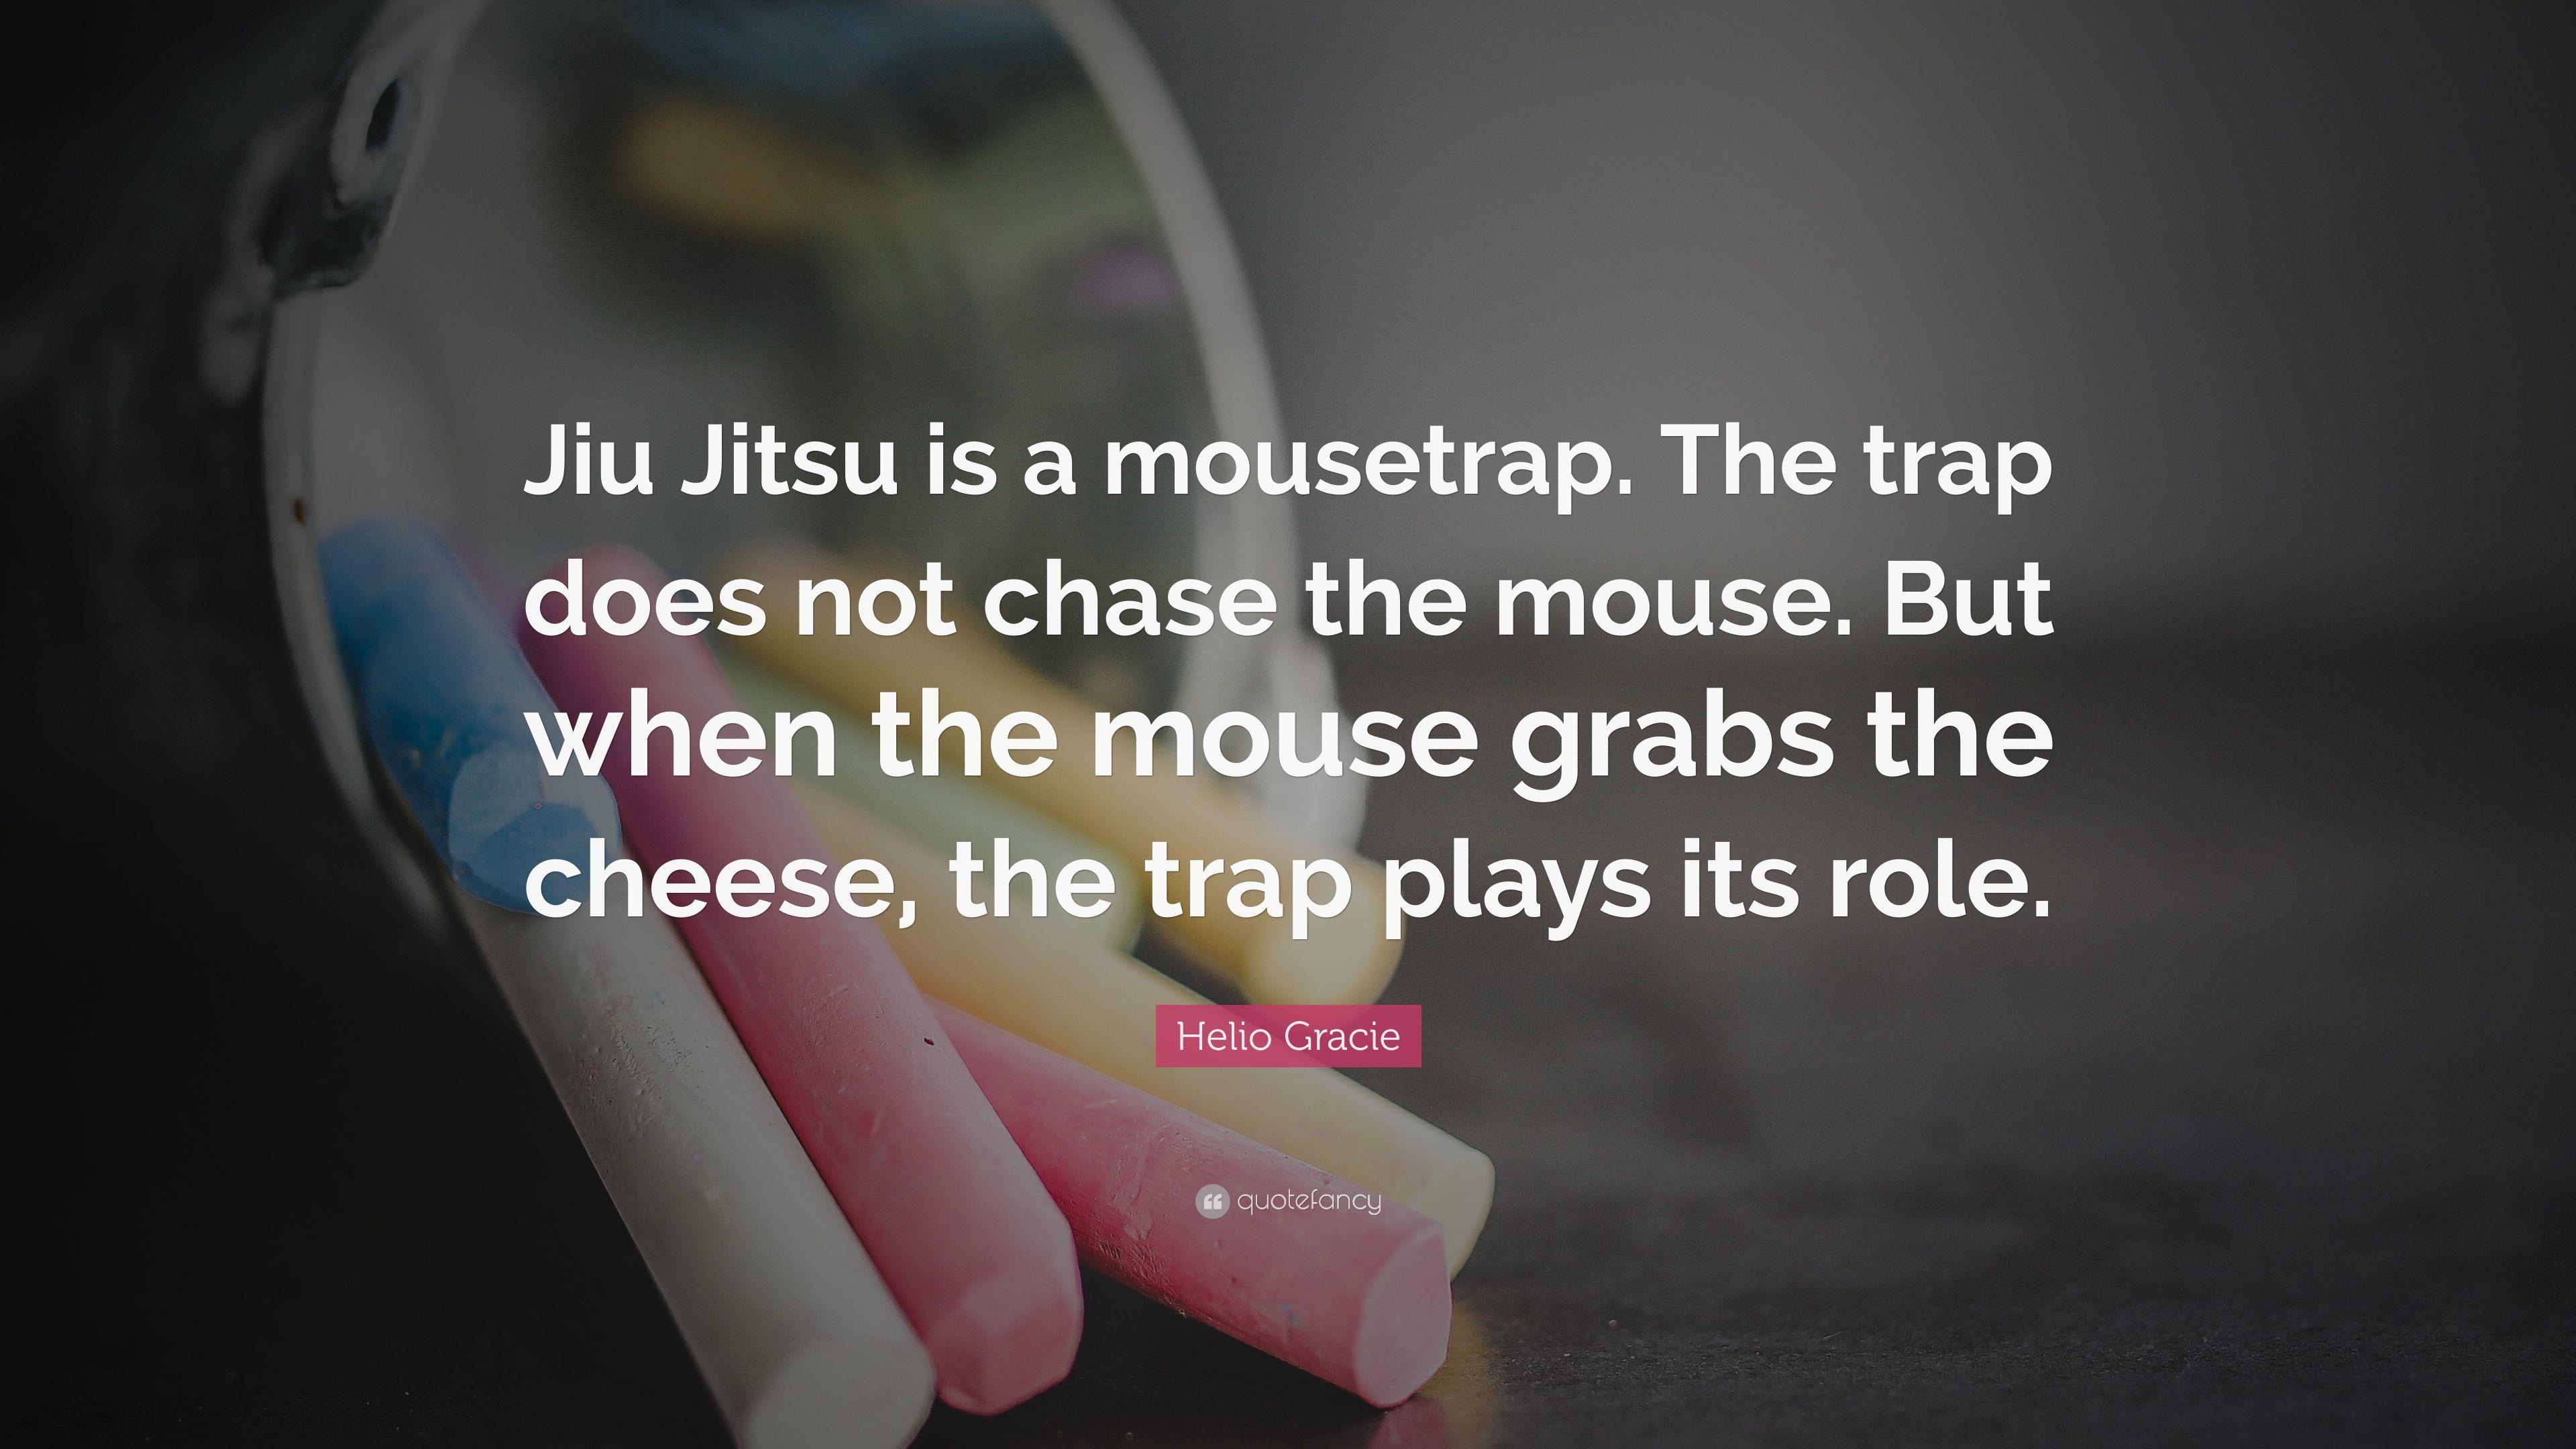 Helio Gracie Quote: “Jiu Jitsu is a mousetrap. The trap does not